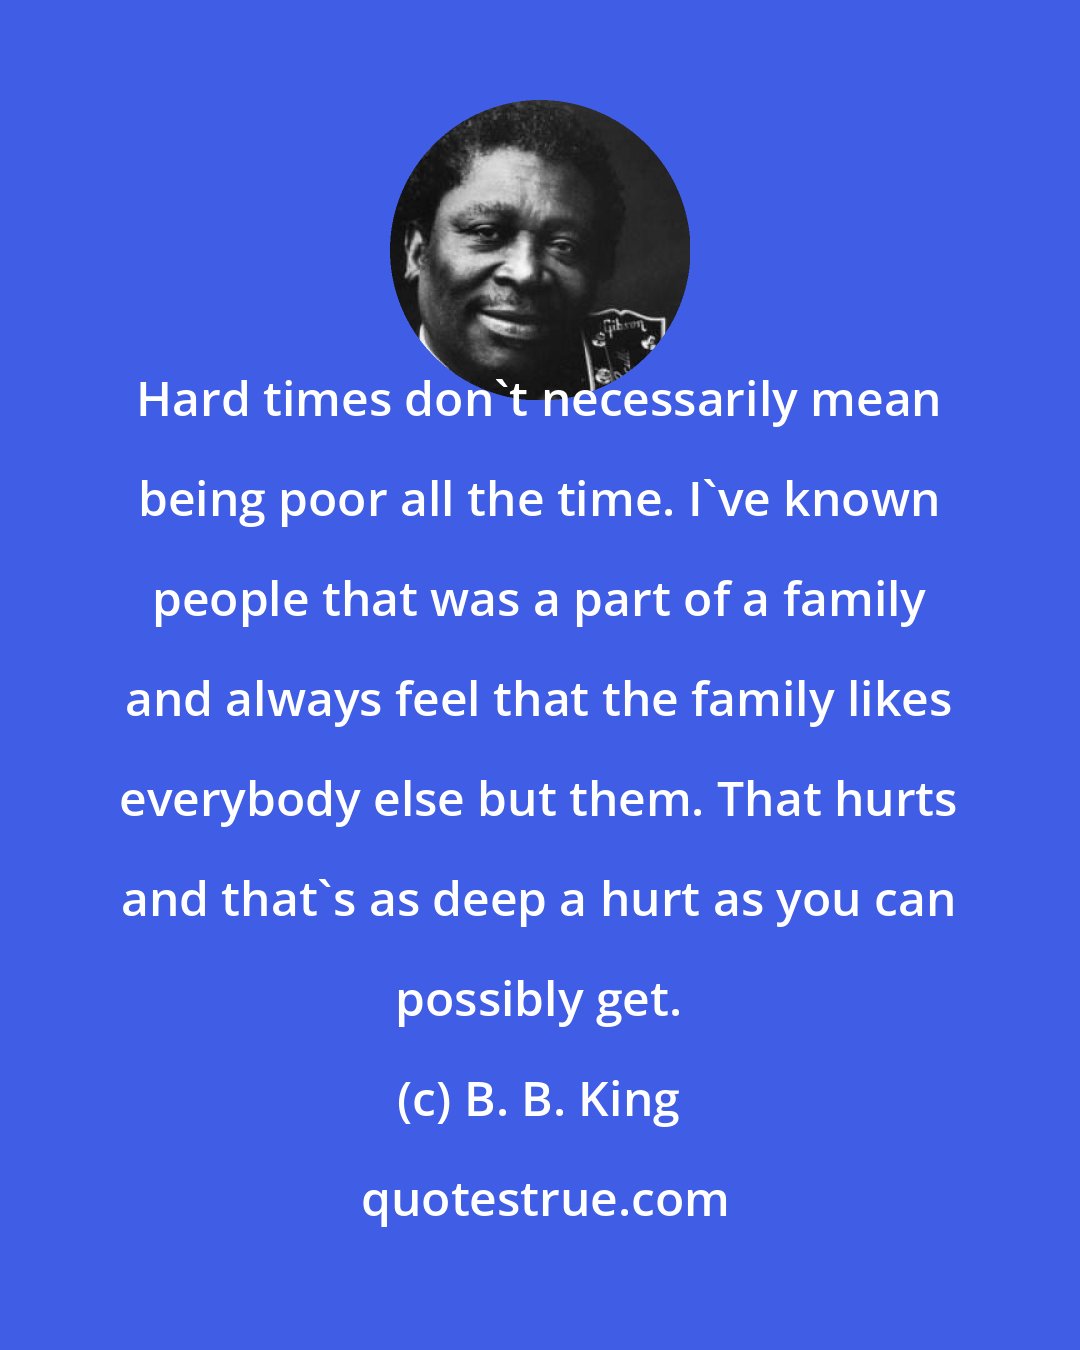 B. B. King: Hard times don't necessarily mean being poor all the time. I've known people that was a part of a family and always feel that the family likes everybody else but them. That hurts and that's as deep a hurt as you can possibly get.